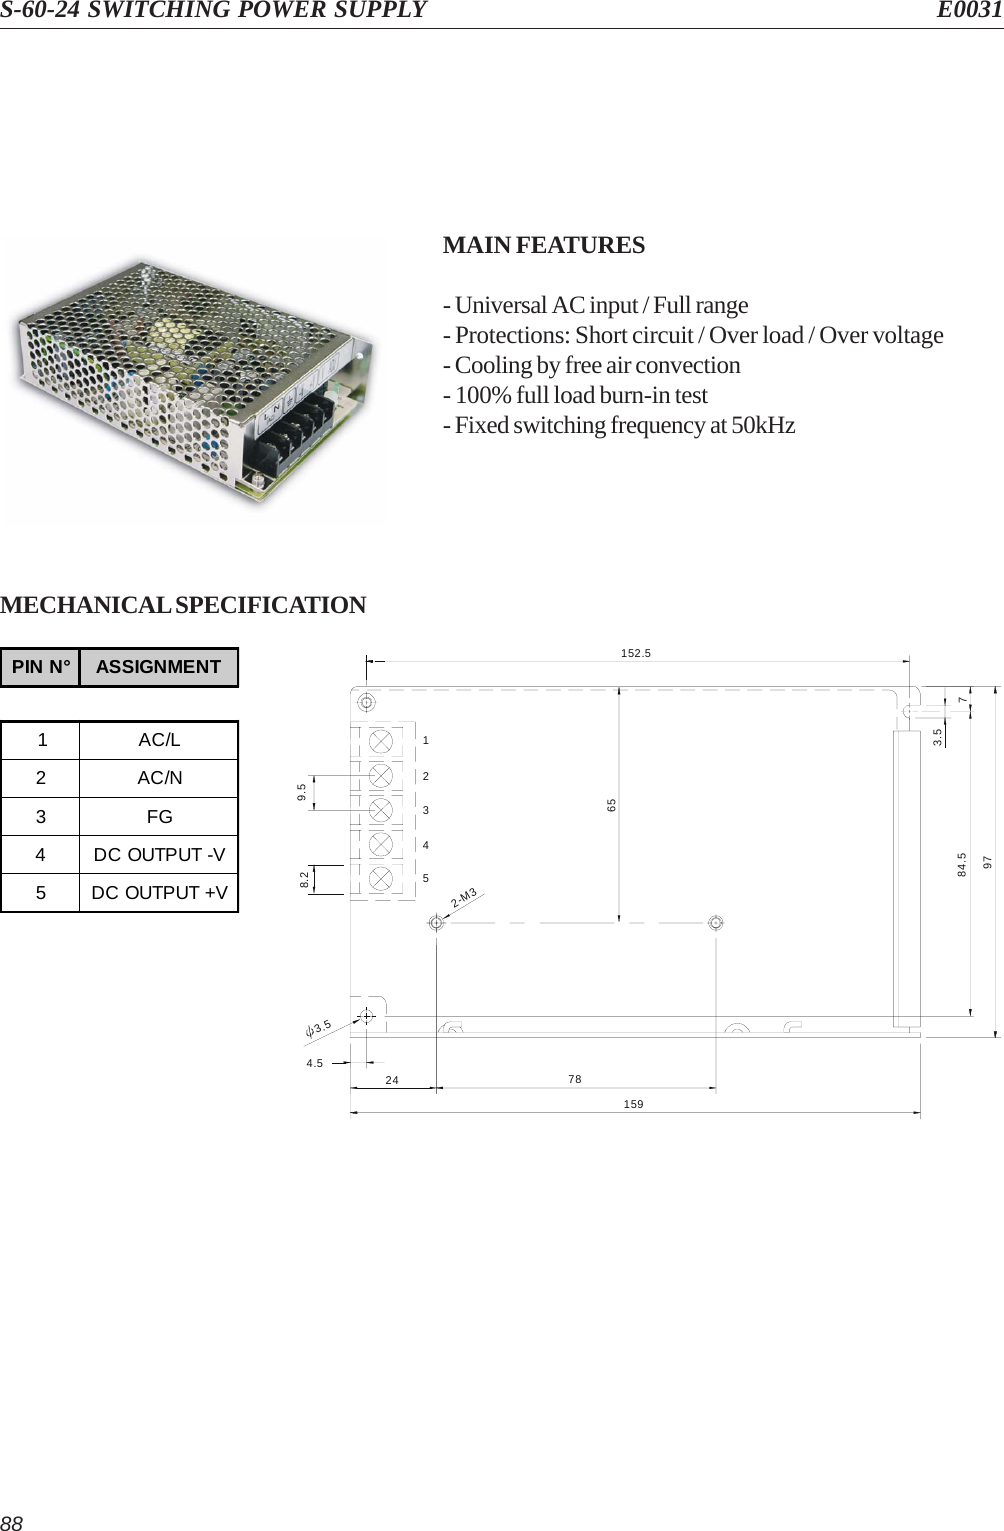 88S-60-24 SWITCHING POWER SUPPLY E0031MAIN FEATURES- Universal AC input / Full range- Protections: Short circuit / Over load / Over voltage- Cooling by free air convection- 100% full load burn-in test- Fixed switching frequency at 50kHzMECHANICAL SPECIFICATION4.565152.59784.5 72-M378241593.53.554328.2 9.51PIN N° ASSIGNMENT1AC/L2AC/N3FG4 DC OUTPUT -V5DC OUTPUT +V